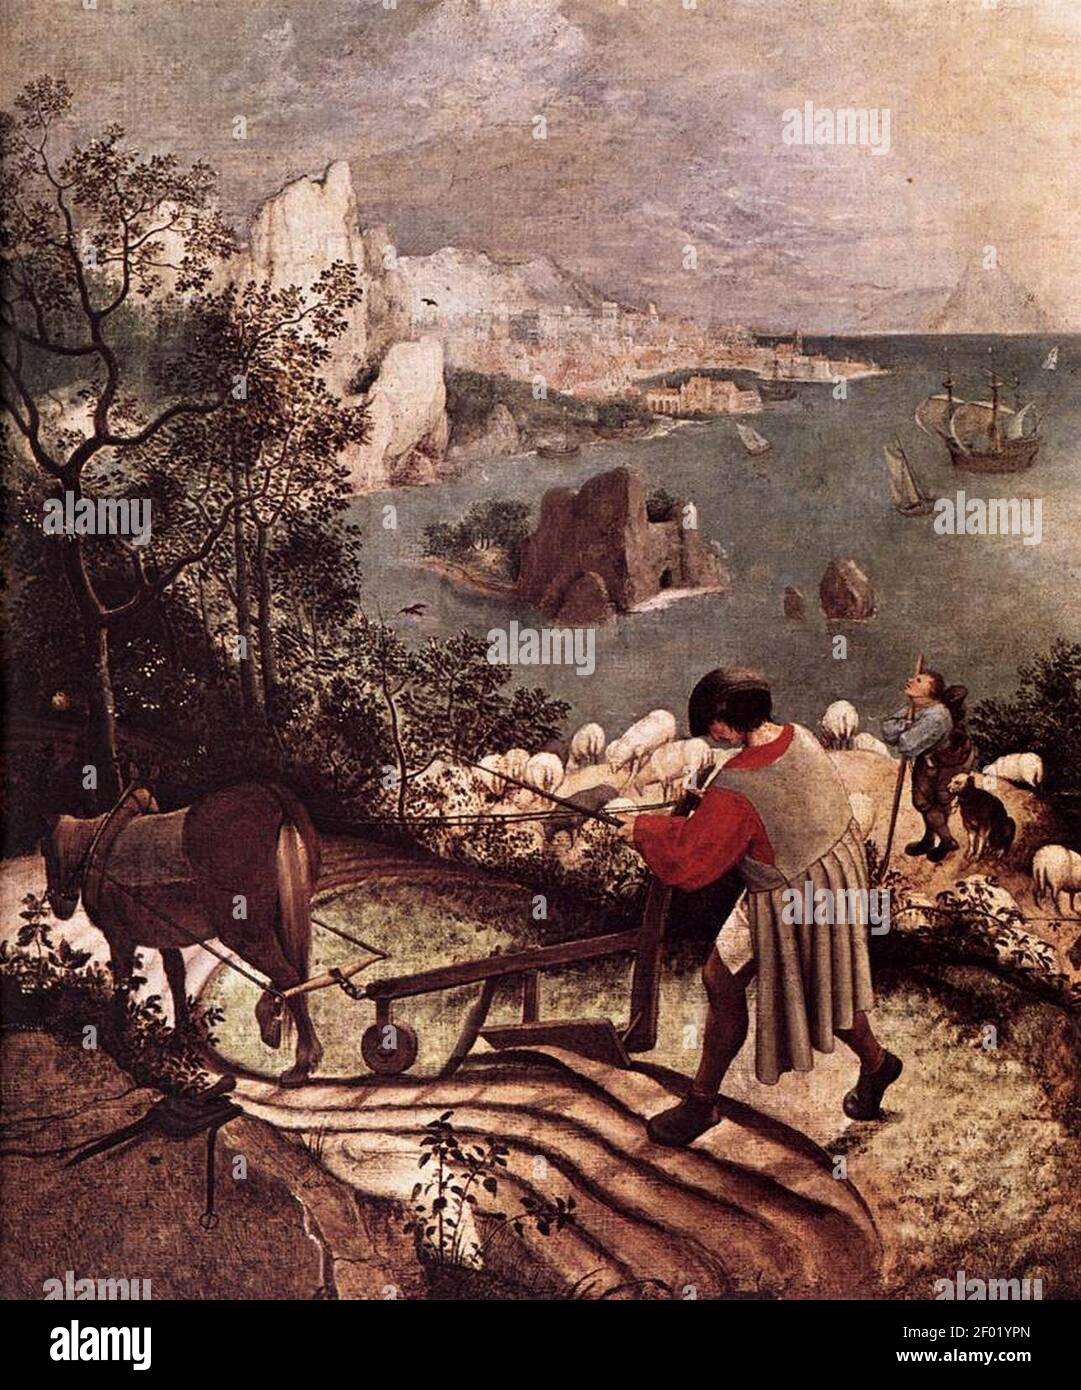 Pieter Bruegel the Elder - Landscape with the Fall of Icarus (detail) Stock Photo